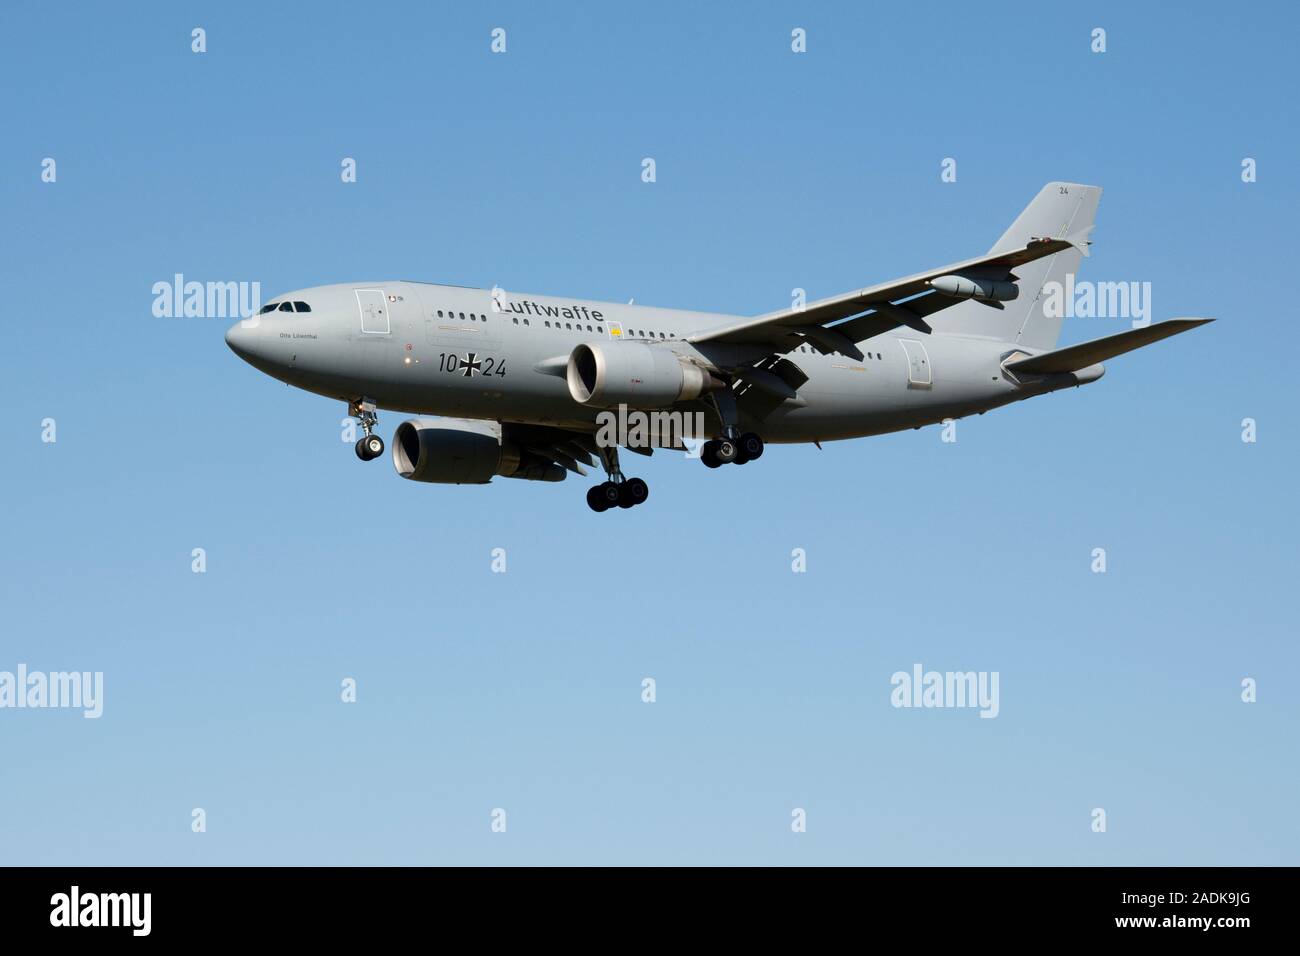 Airbus A.310-304MRTT 10+24, of 1 FBS, German Air Force, based at Koln-Bonn, seen at RAF Brize Norton, Oxfordshire on the 18th September 2019. Stock Photo